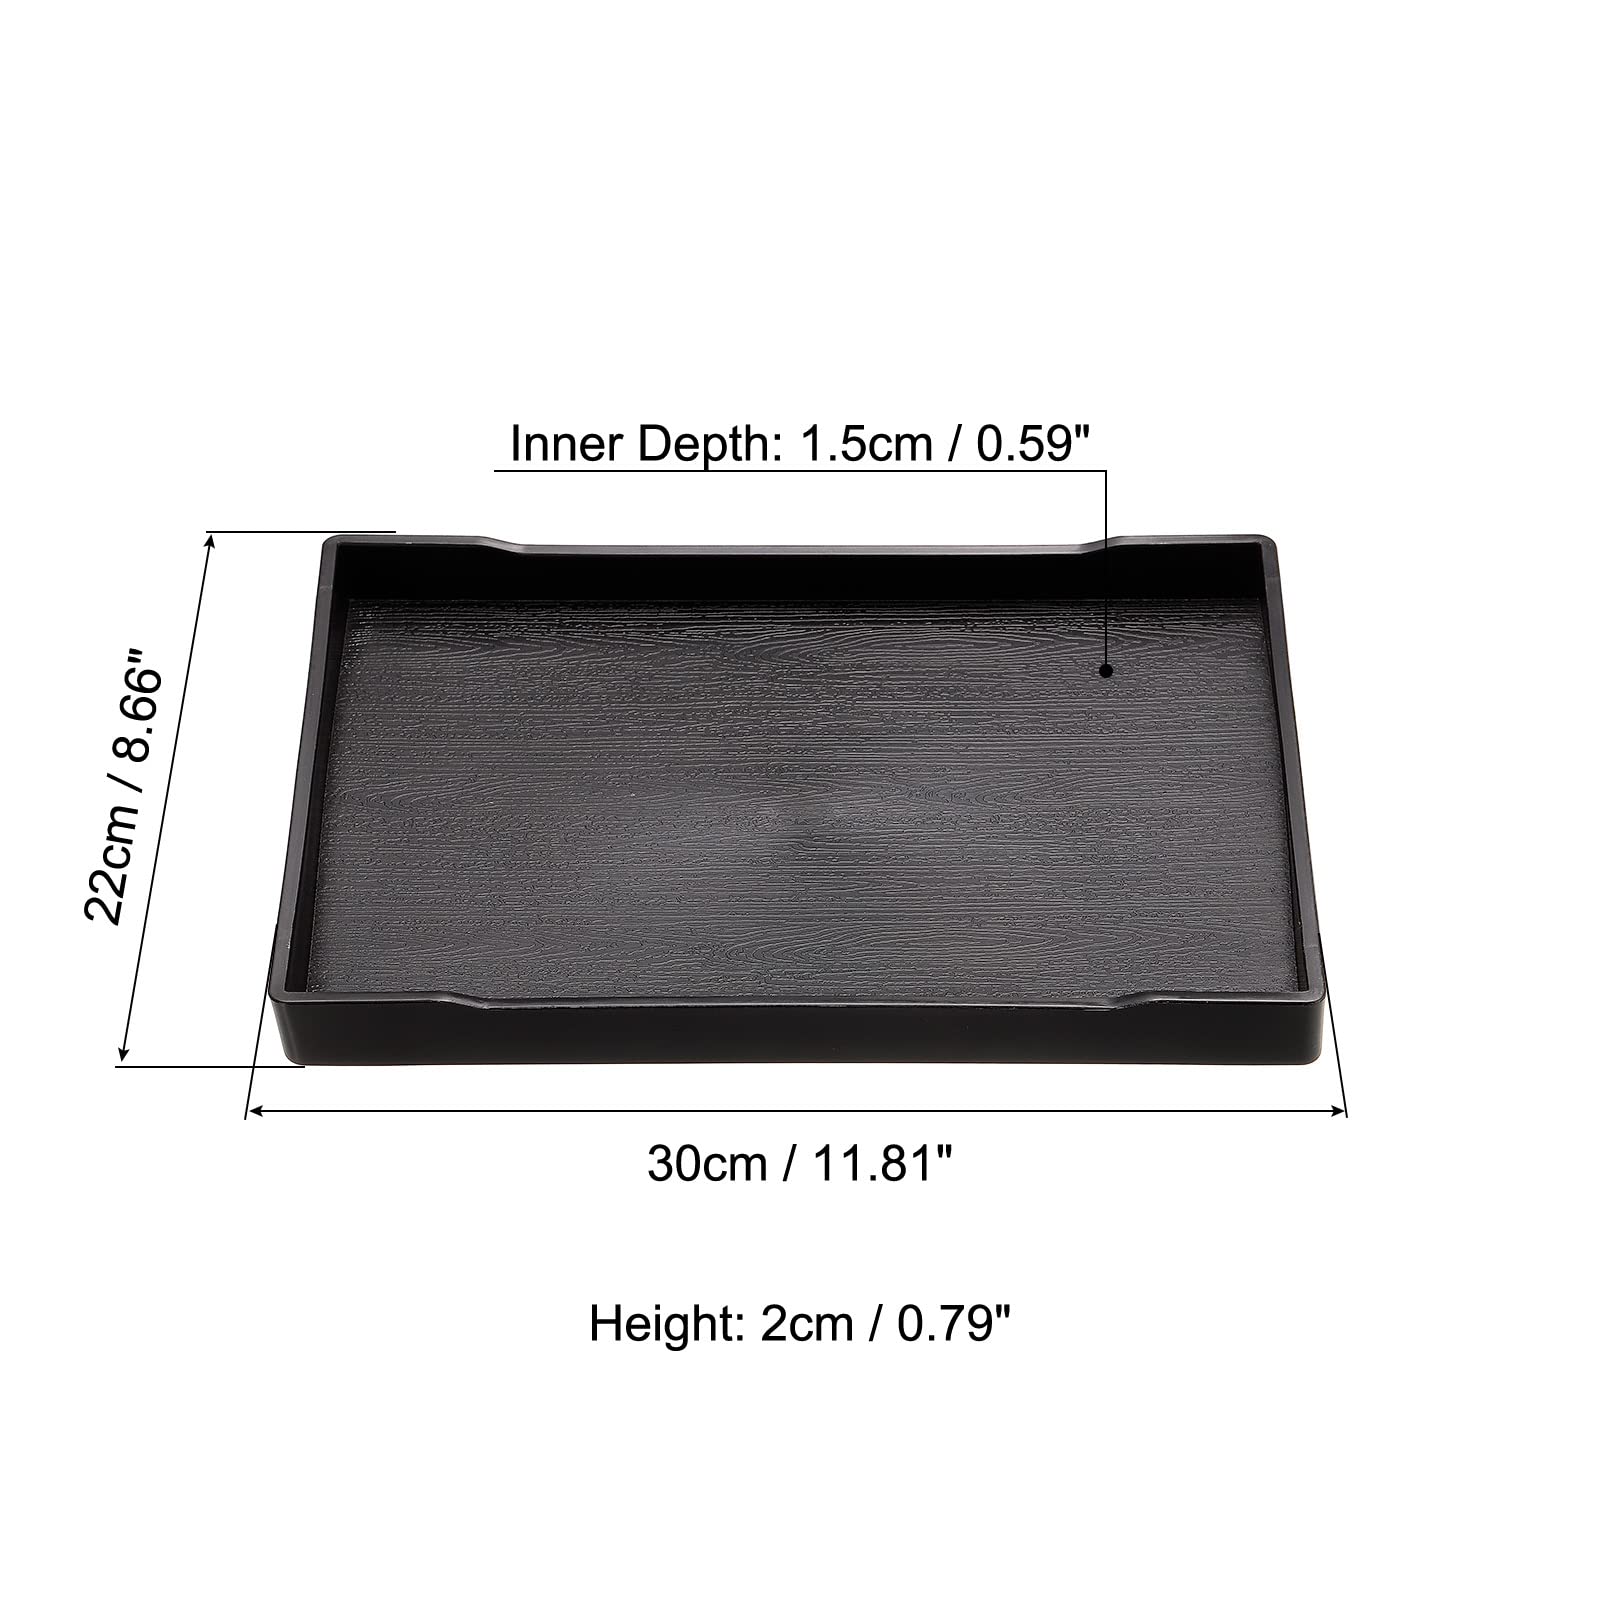 PATIKIL 12x9 Fast Food Tray, Plastic Reusable Recyclable Multi-Purpose Rectangle Serving Tray for Restaurant Home Kitchen, Black